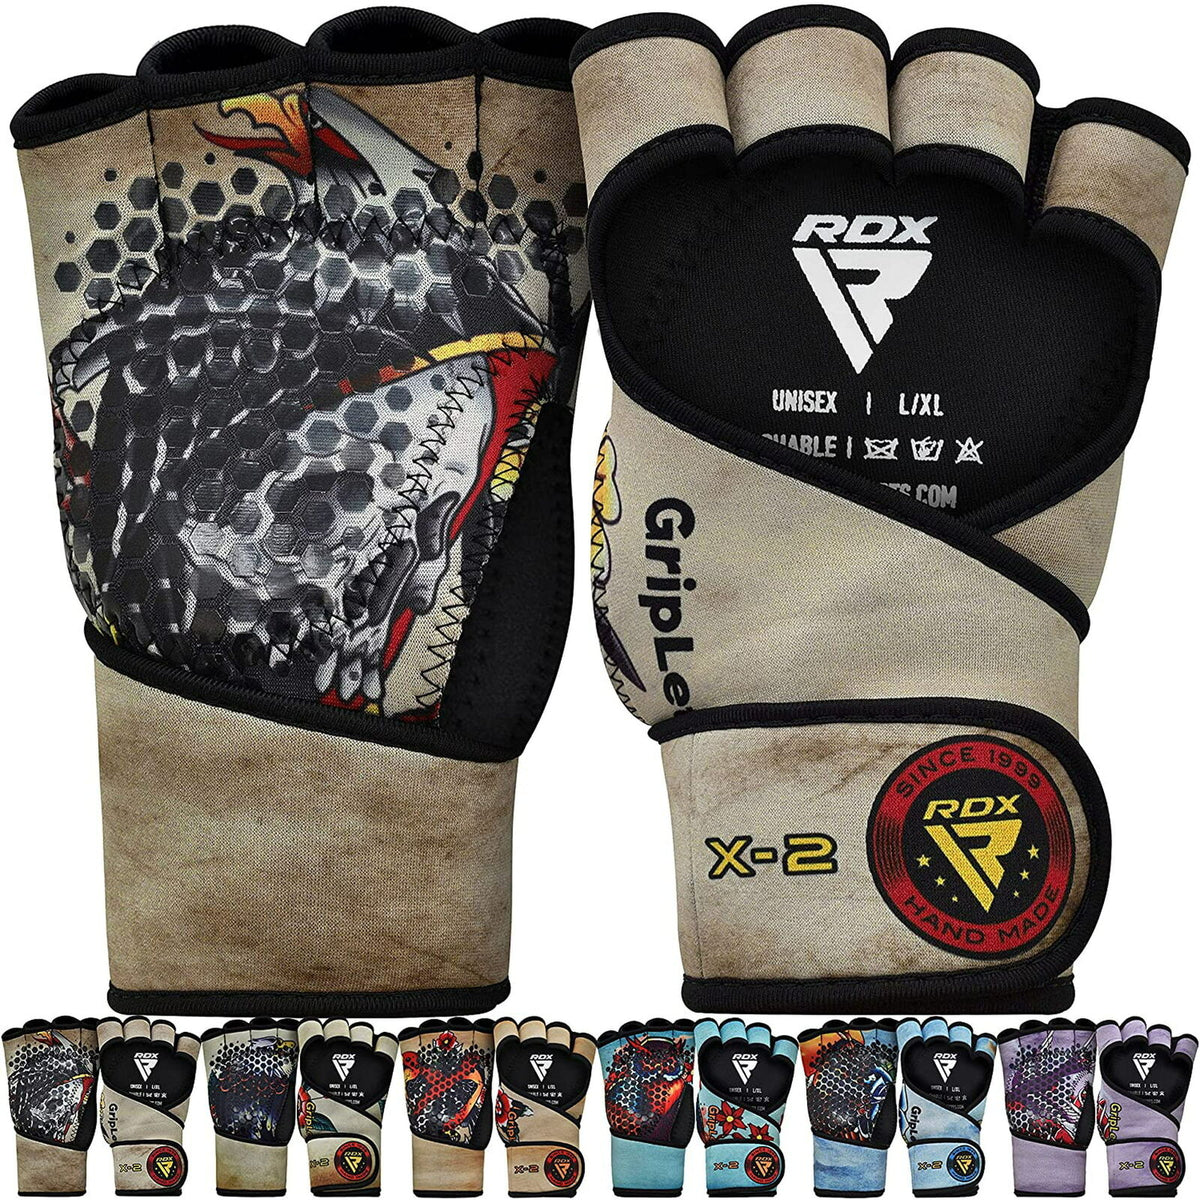 Gloves for Gym With Wrist Support